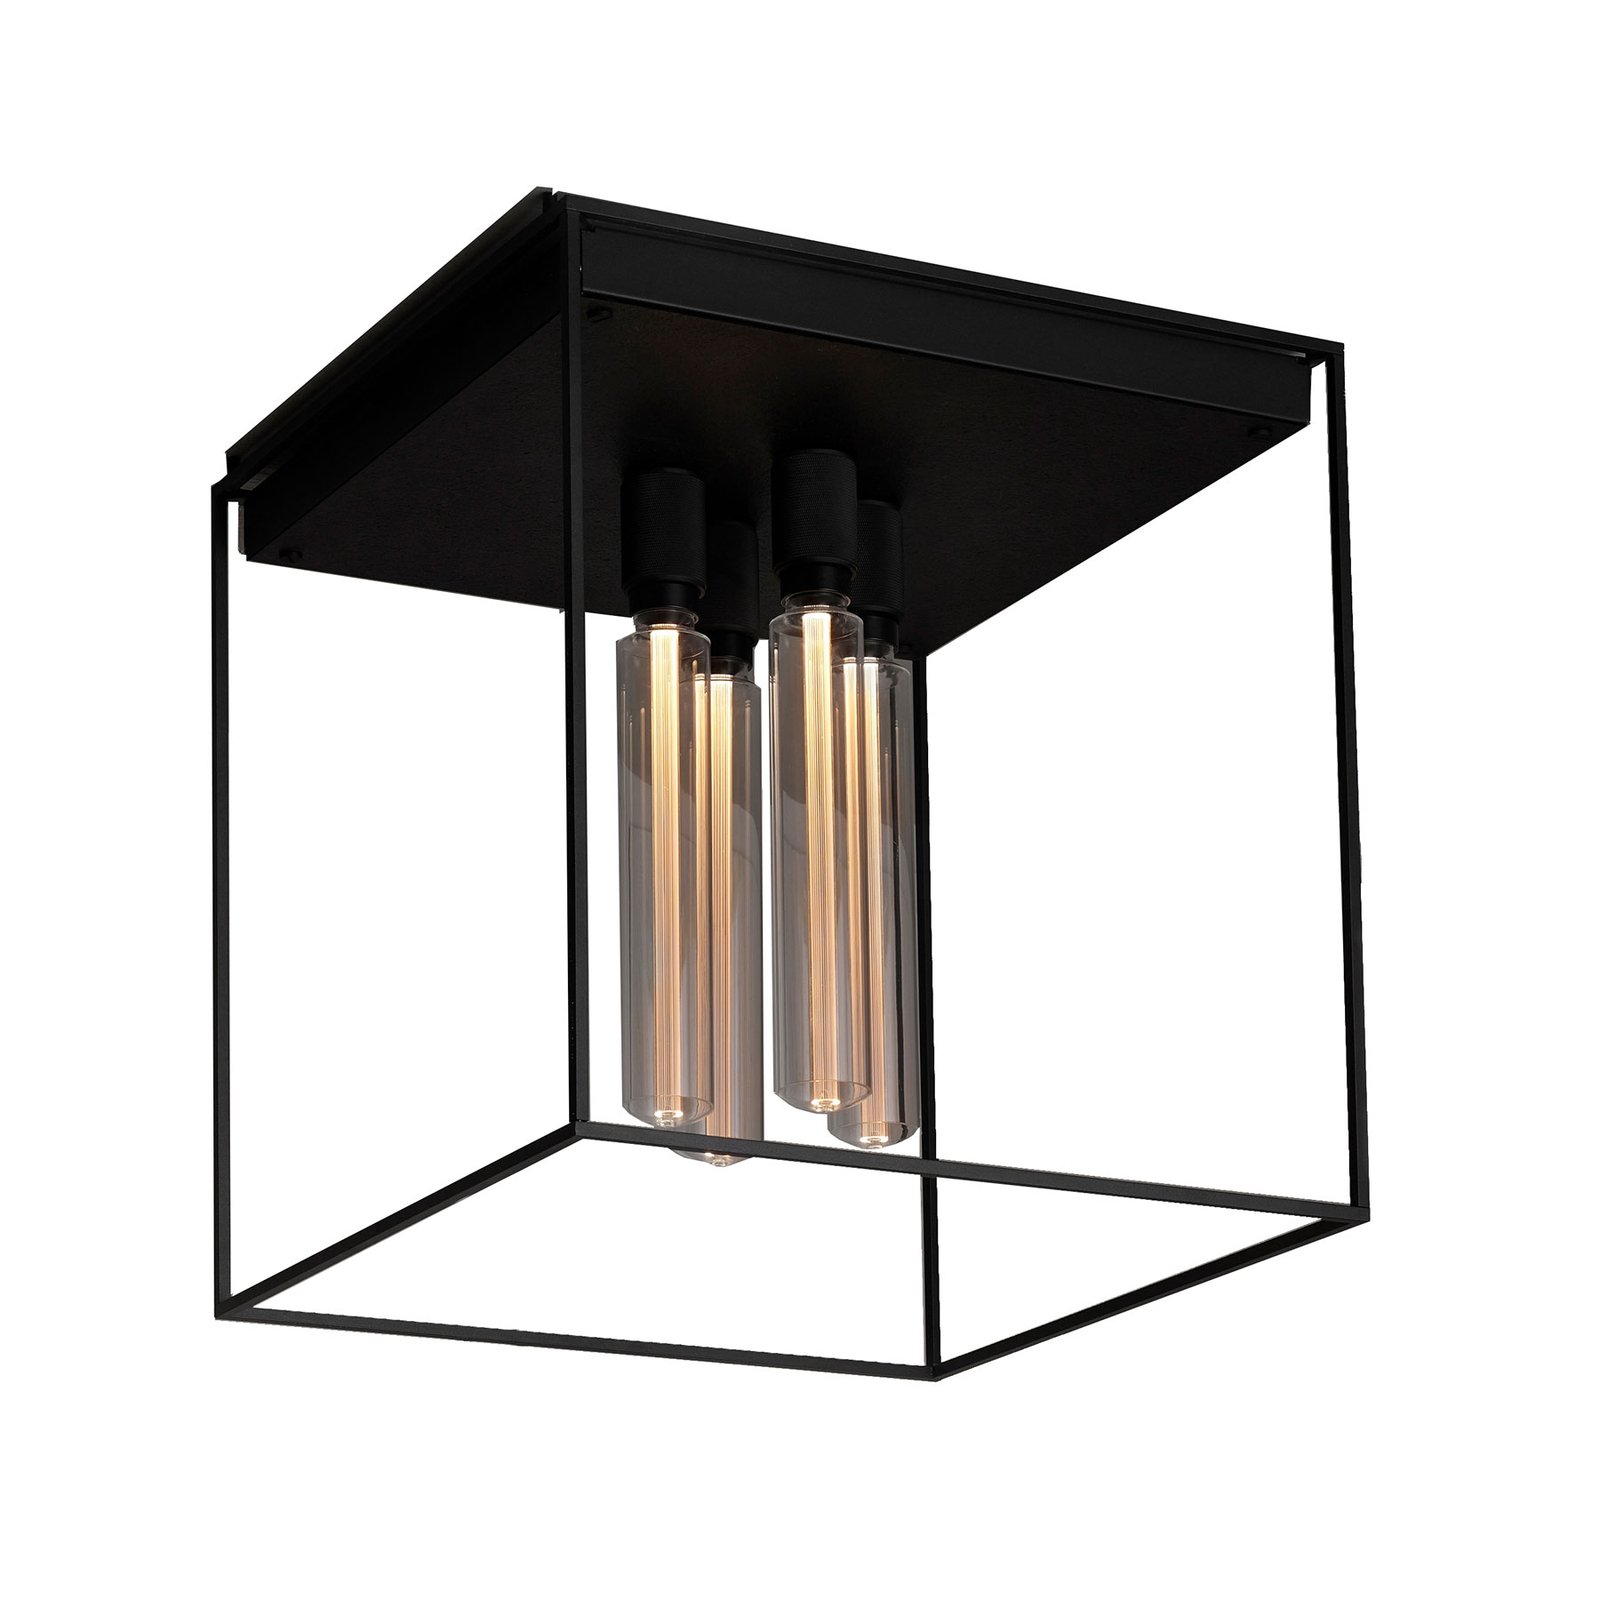 Buster + Punch Caged Ceiling 4.0 LED marmo black